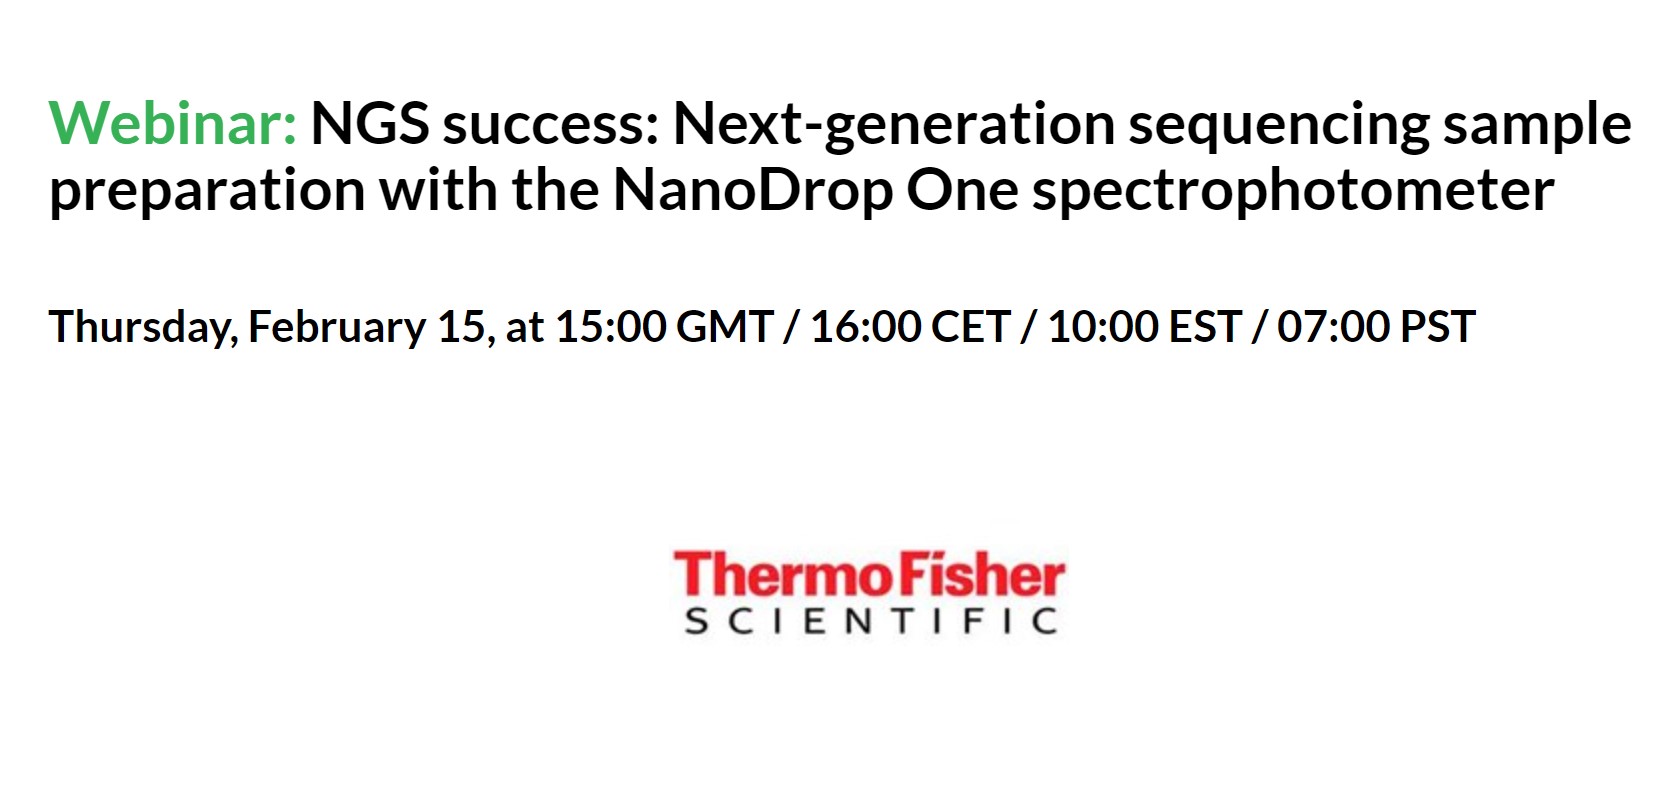 ThermoFisher Scientific: NGS success: Next-generation sequencing sample preparation with the NanoDrop One spectrophotometer